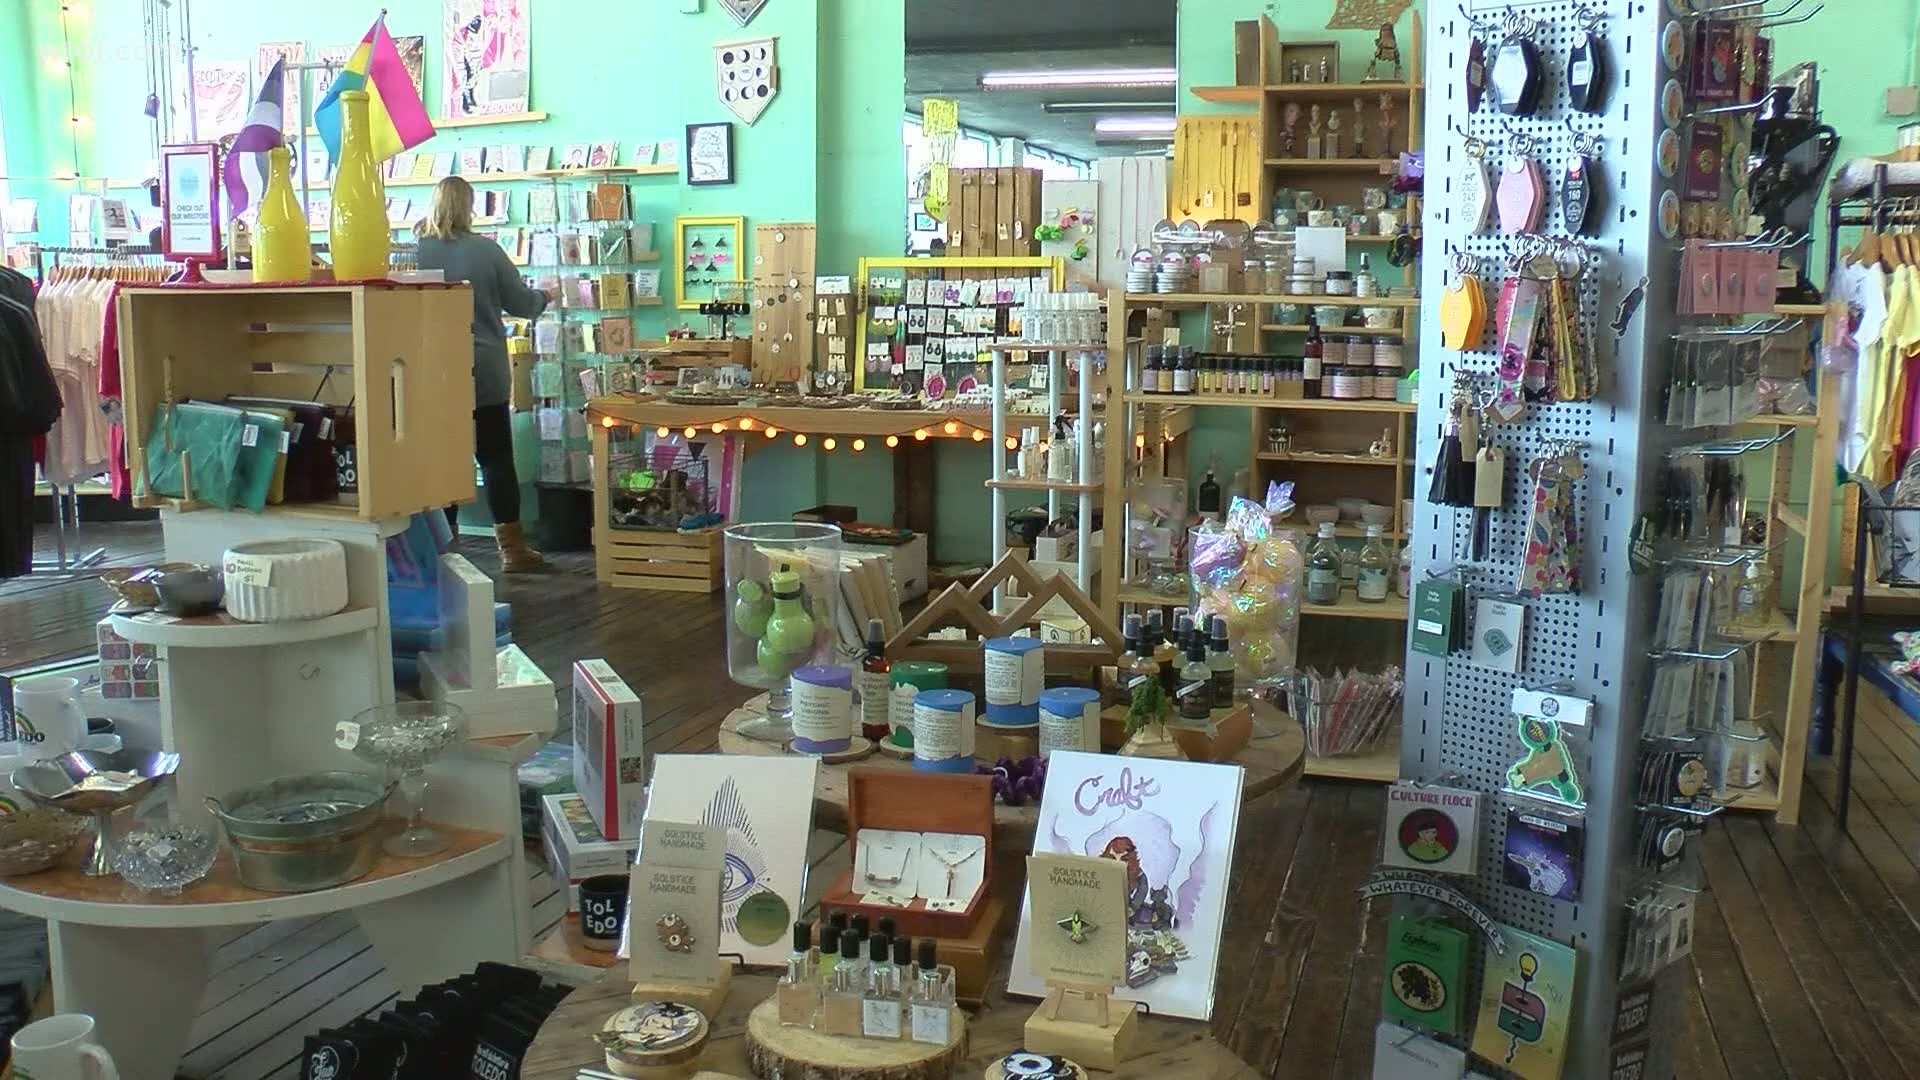 Handmade Toledo is moving the market online this year as the state continues to fight COVID-19. The event lasts from Small Business Saturday through Christmas Eve.